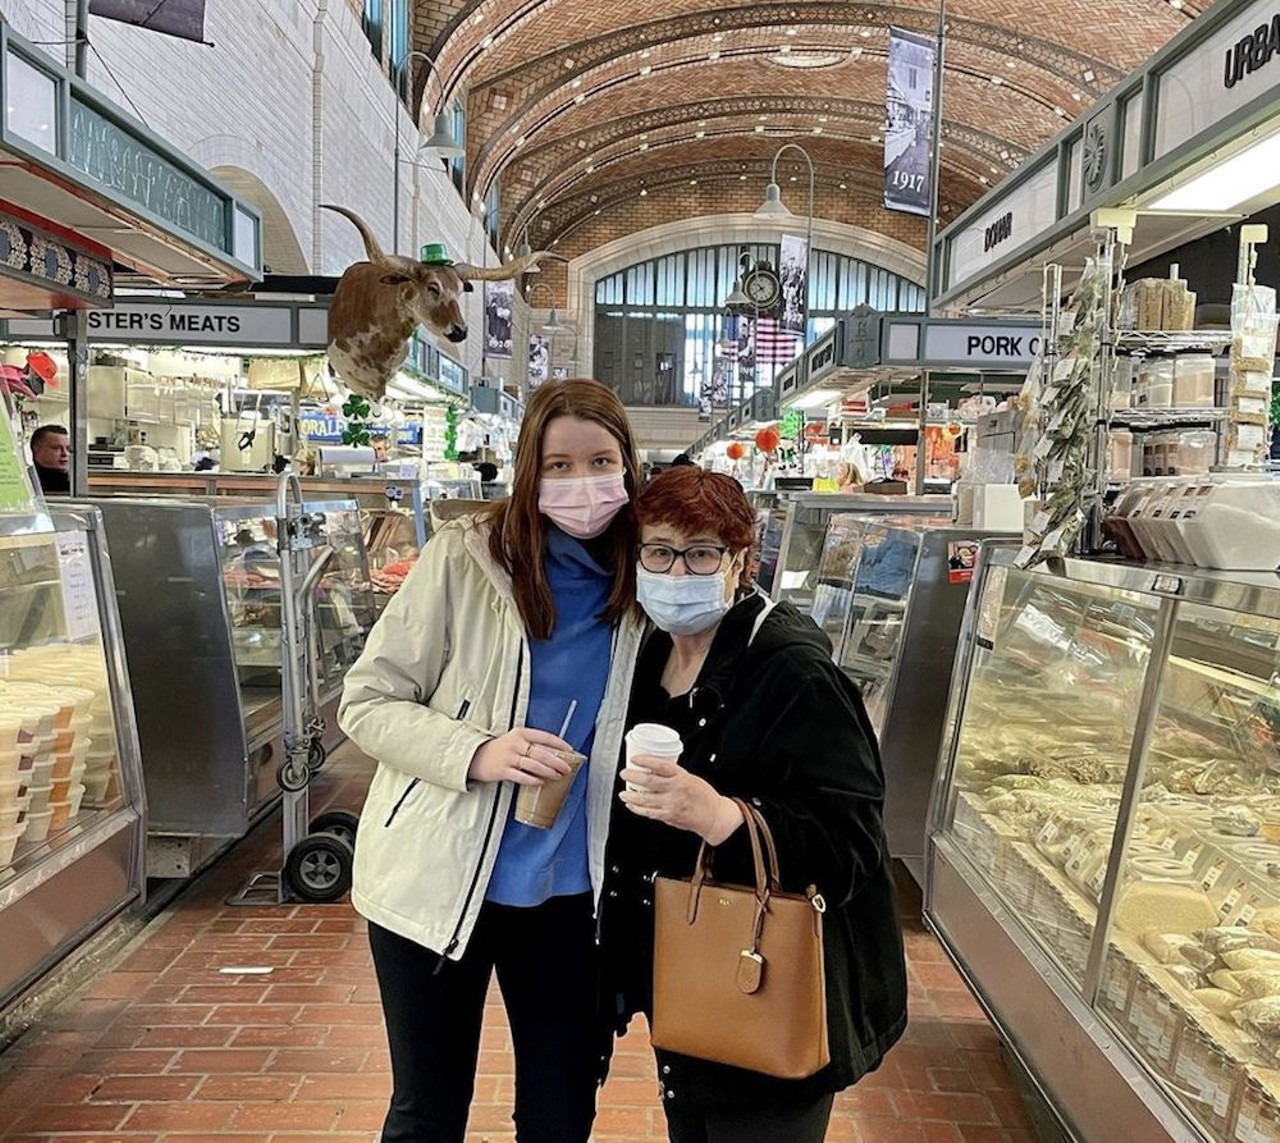  The West Side Market
1979 West 25th St., Cleveland  
Nothing says Cleveland like the West Side Market. And the awesome architecture combined with the delicious food lends itself to being a great place for photographs.
Photo via @uncJake/Instagram